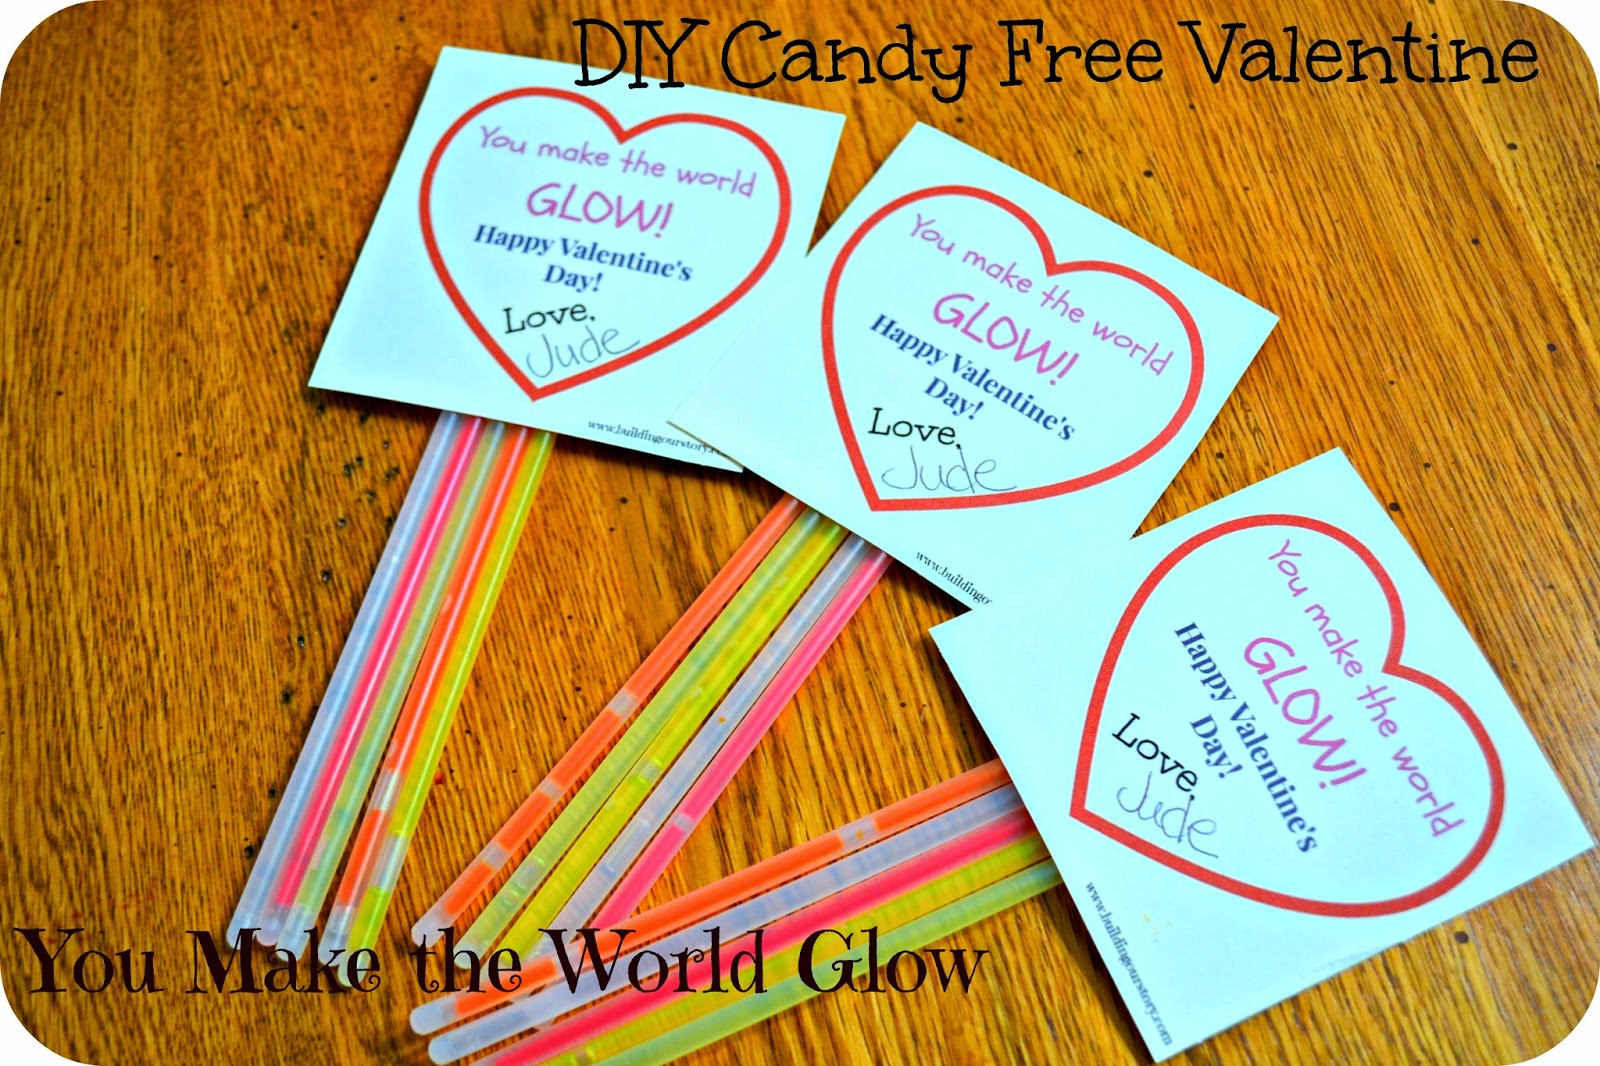 Candy Free Valentine You Make The World Glow Building Our Story